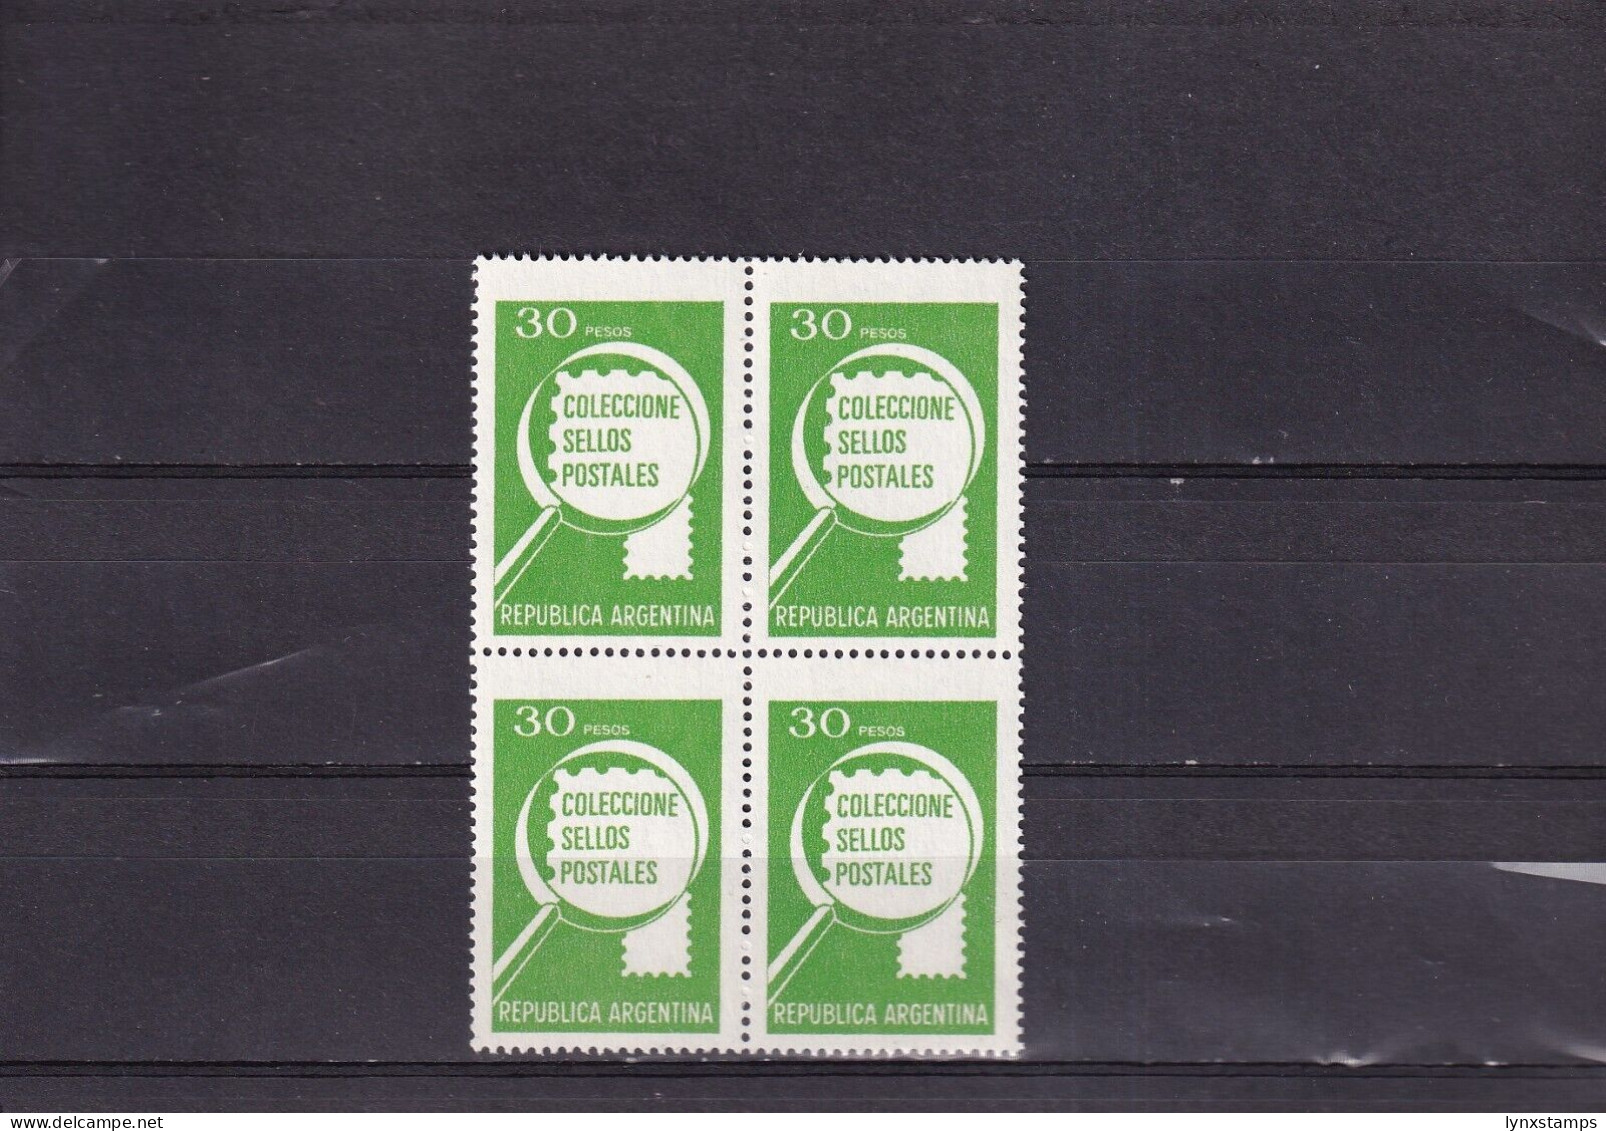 ER03 Argentina 1980 Collect The Postal Stamps MNH Stamps - Neufs